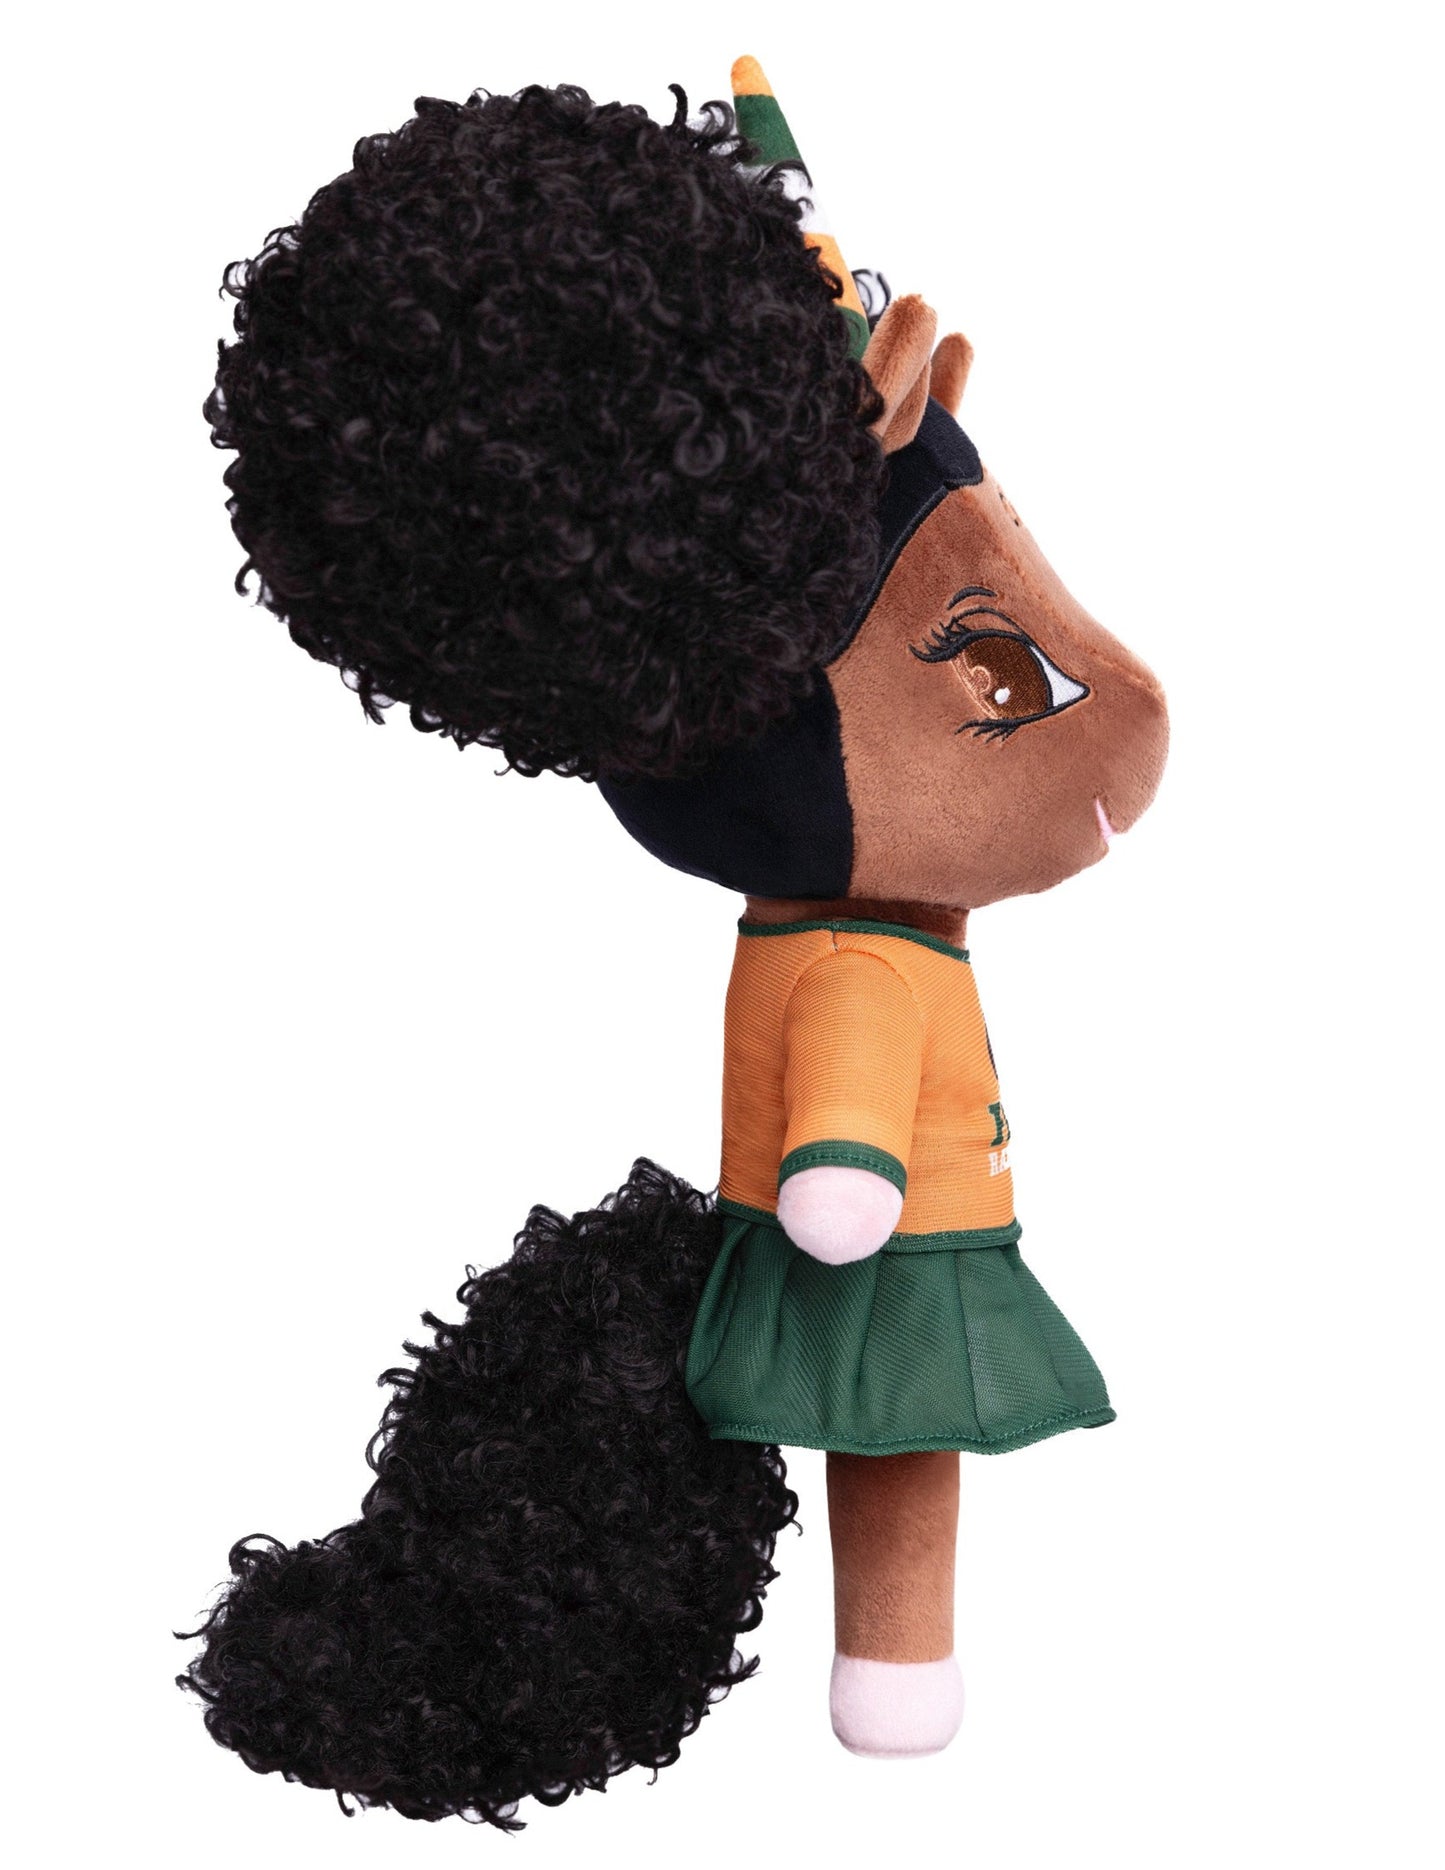 Florida A&M University Unicorn Doll with Afro Puffs - 14 inch